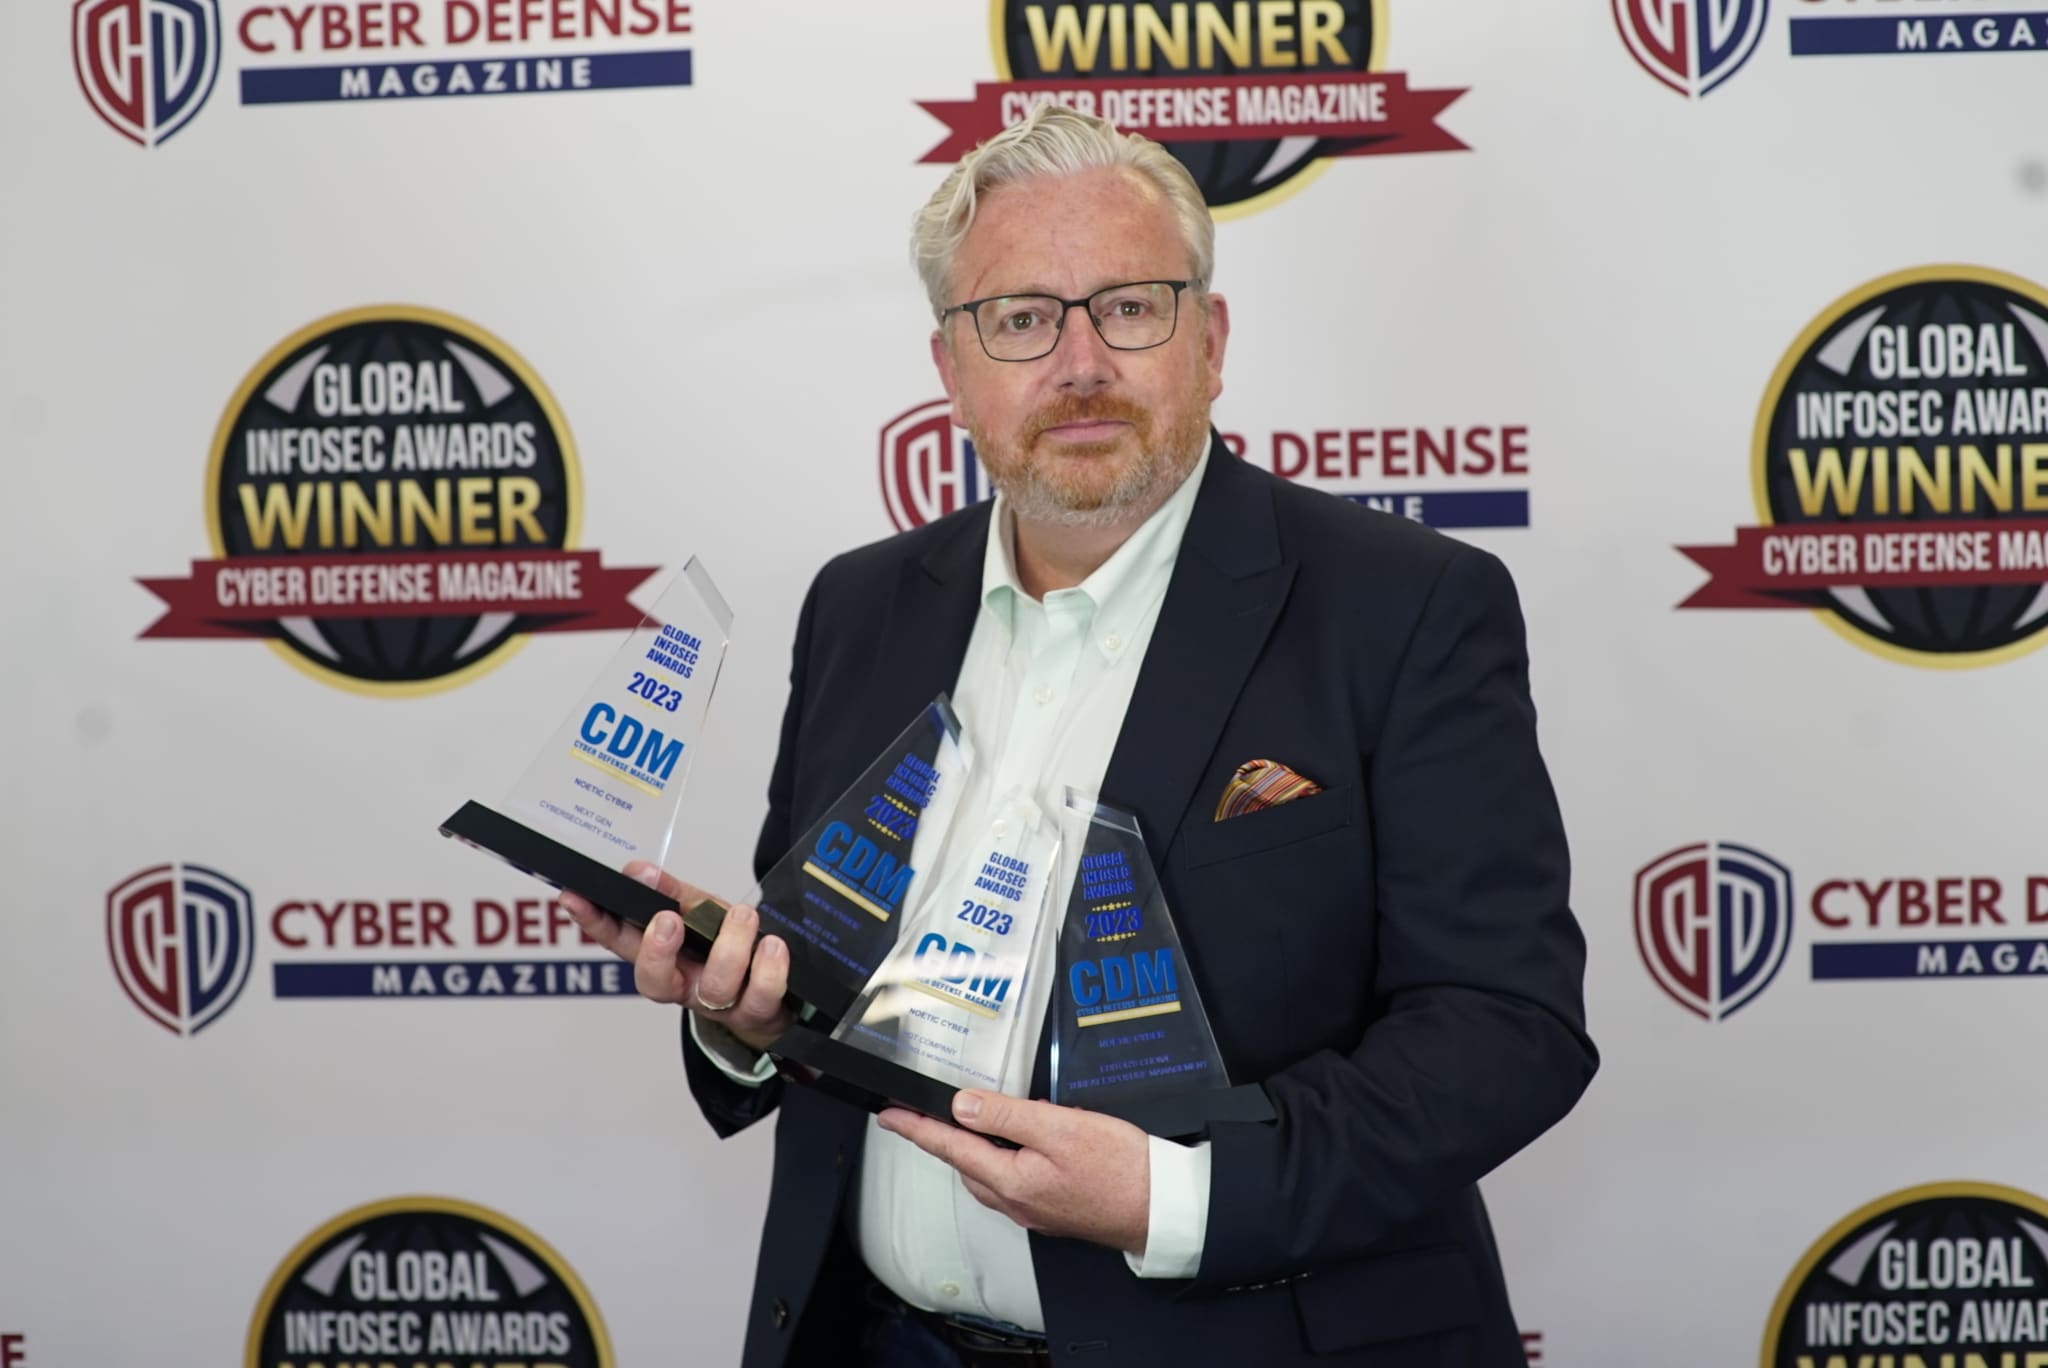 Paul Ayers, Noetic Cyber CEO at the 2023 Global Infosec Awards presented by Cyber Defense Magazine